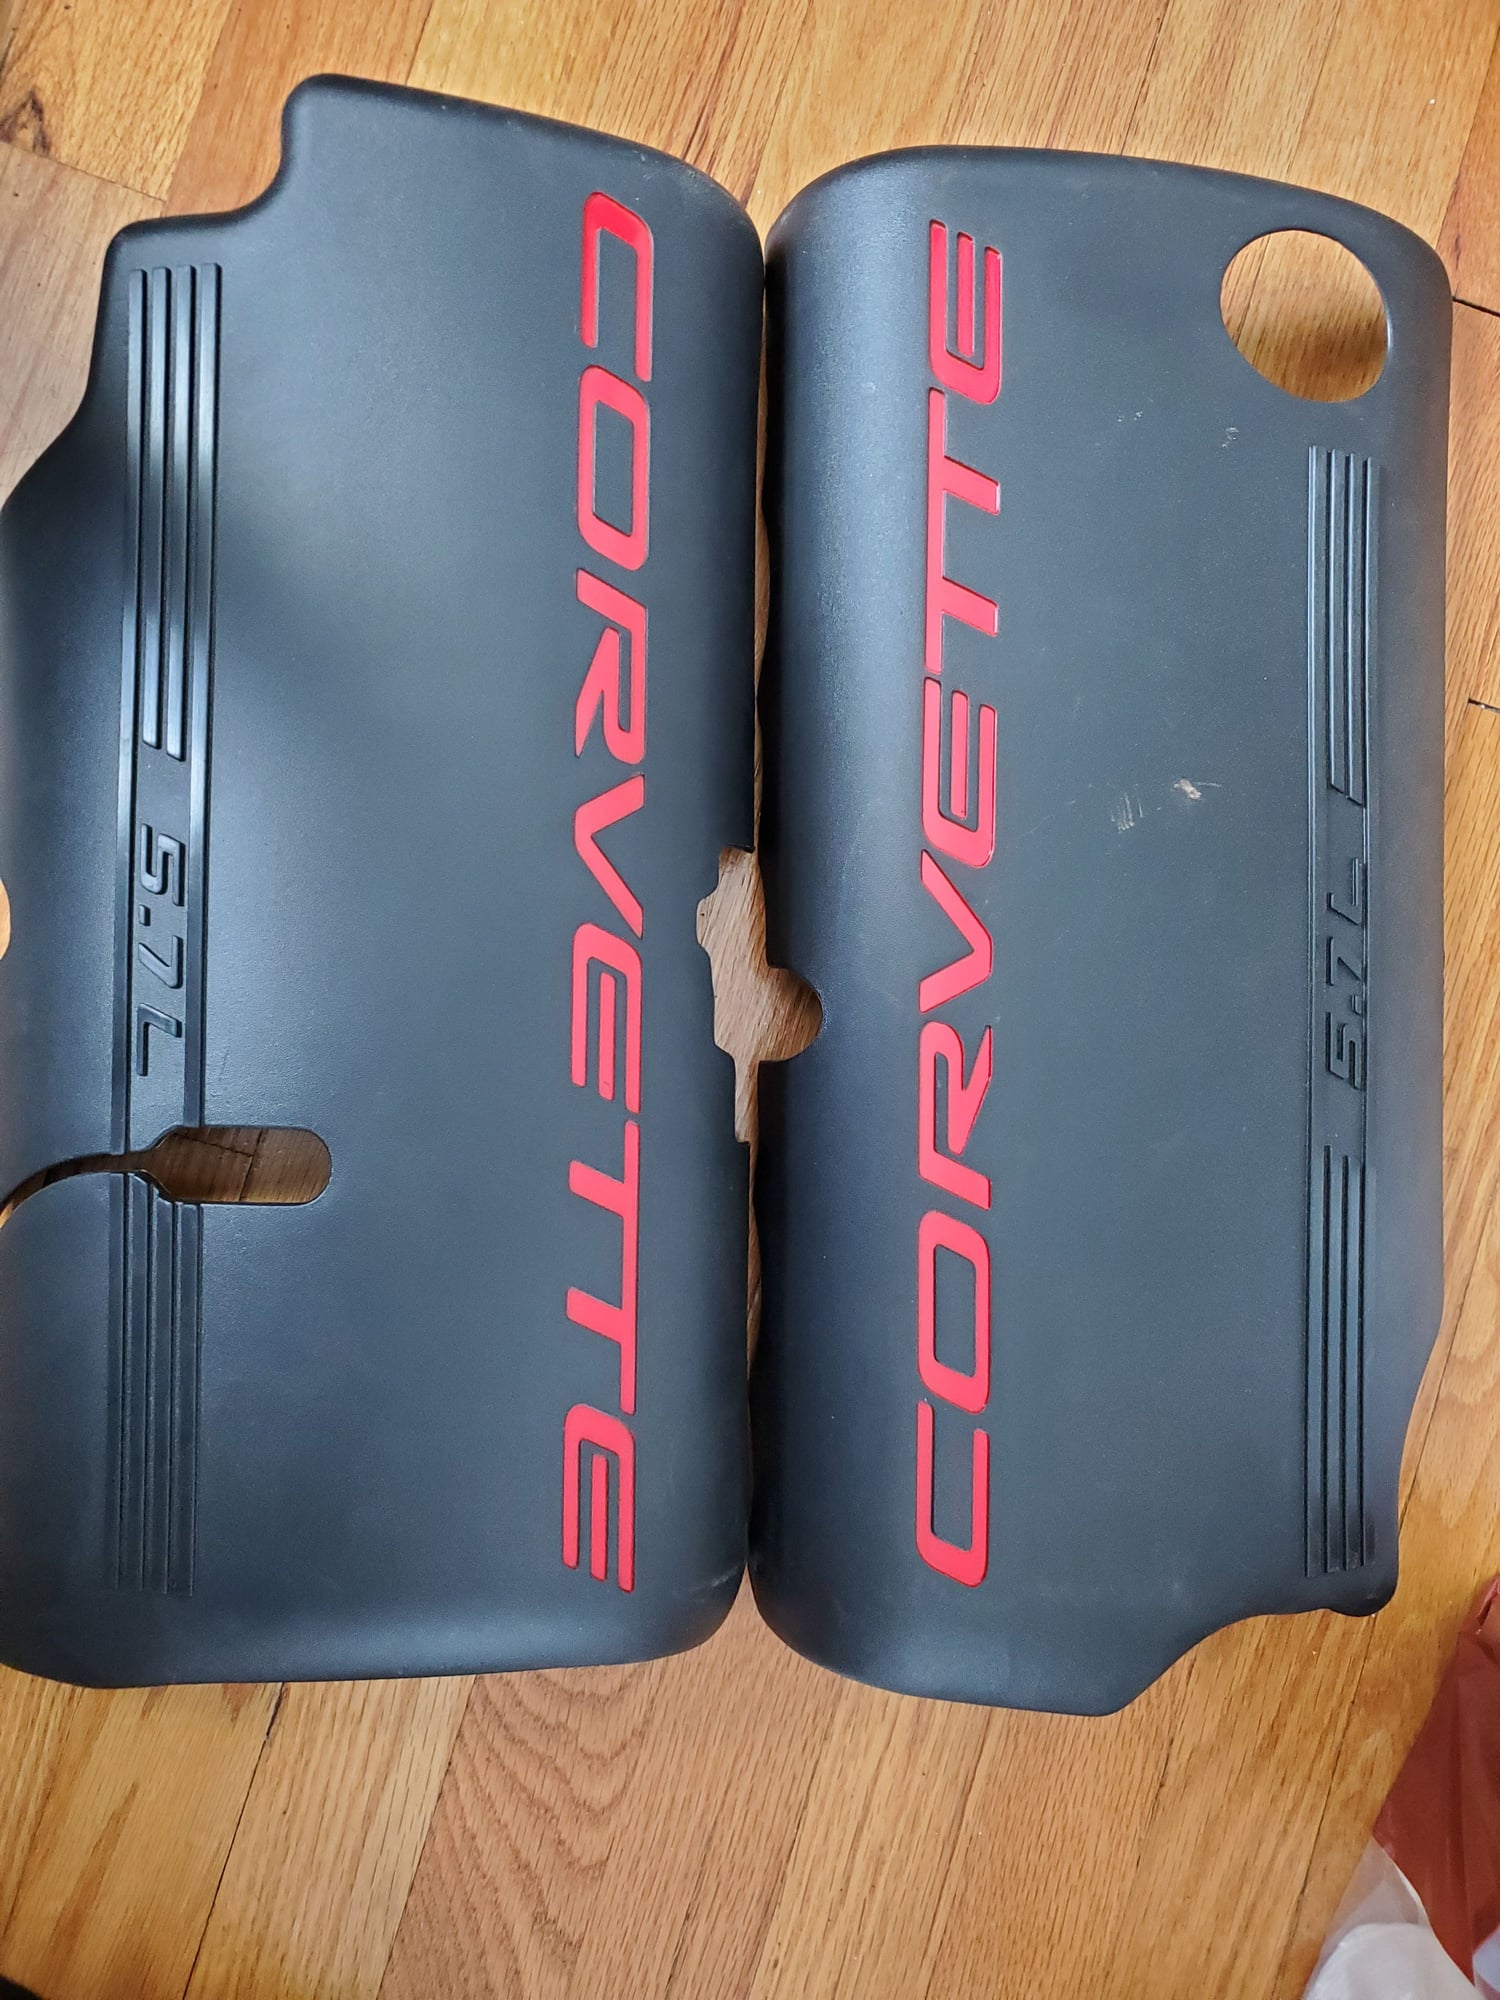 Miscellaneous - C5 Corvette Fuel Rail Covers - New - 0  All Models - Stratford, CT 06614, United States